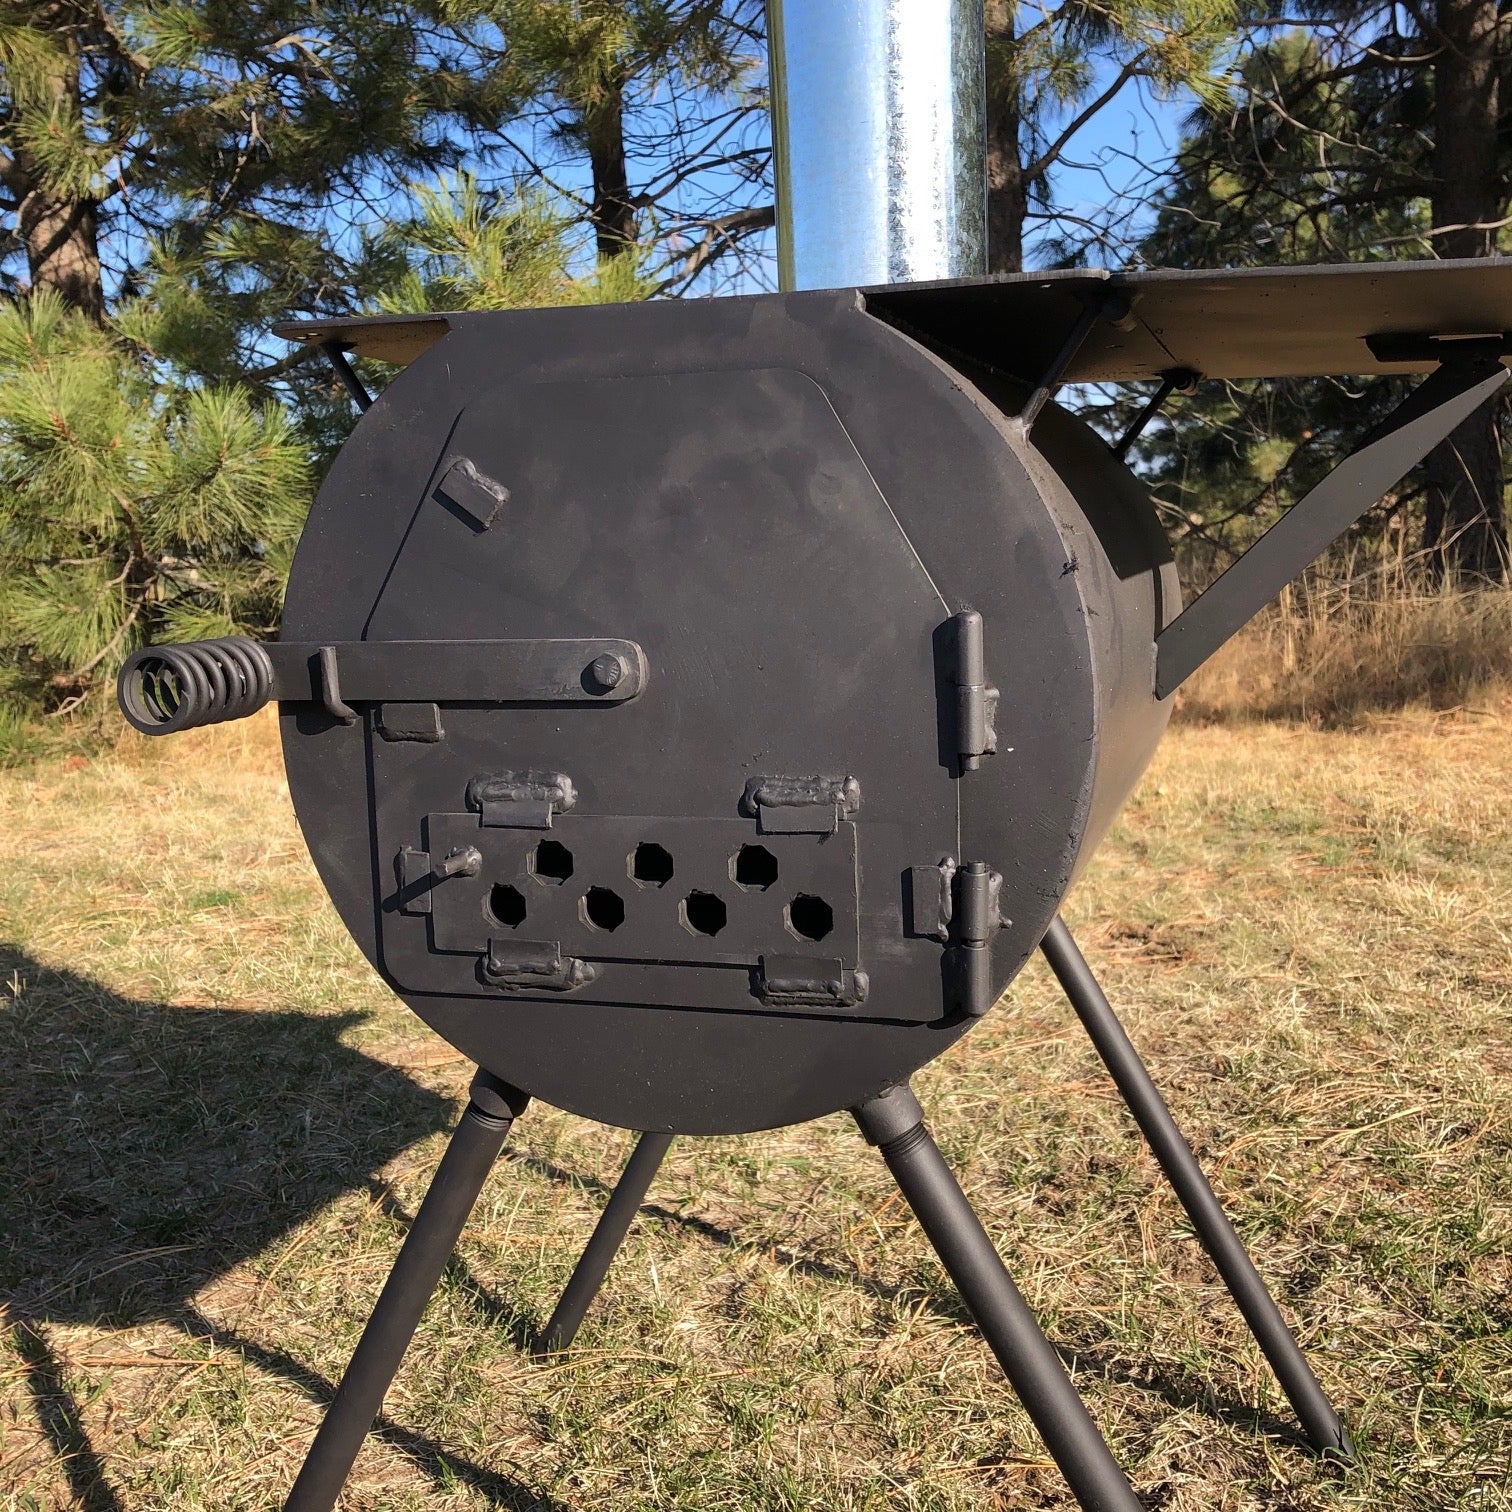 Riley Wood Stove Chimney Oven